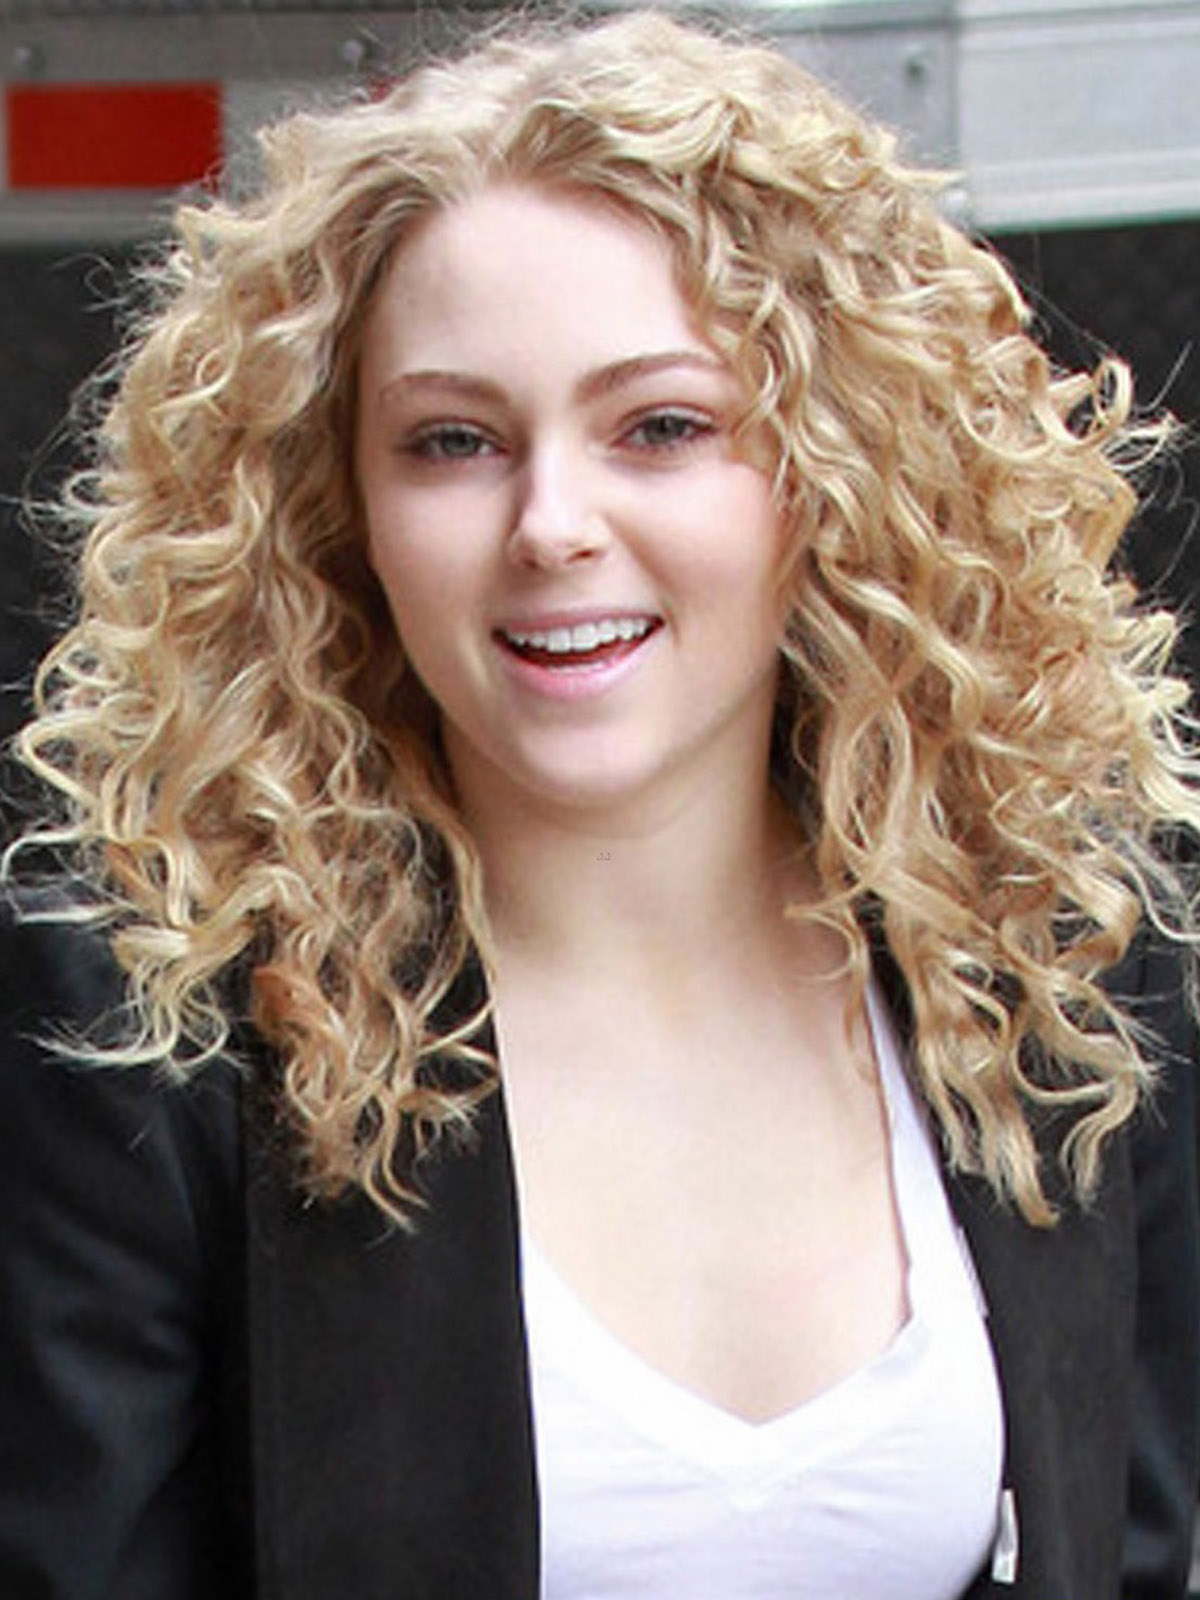 ACTRESS WALLPAPERS: AnnaSophia Robb Hair Style Wallpapers